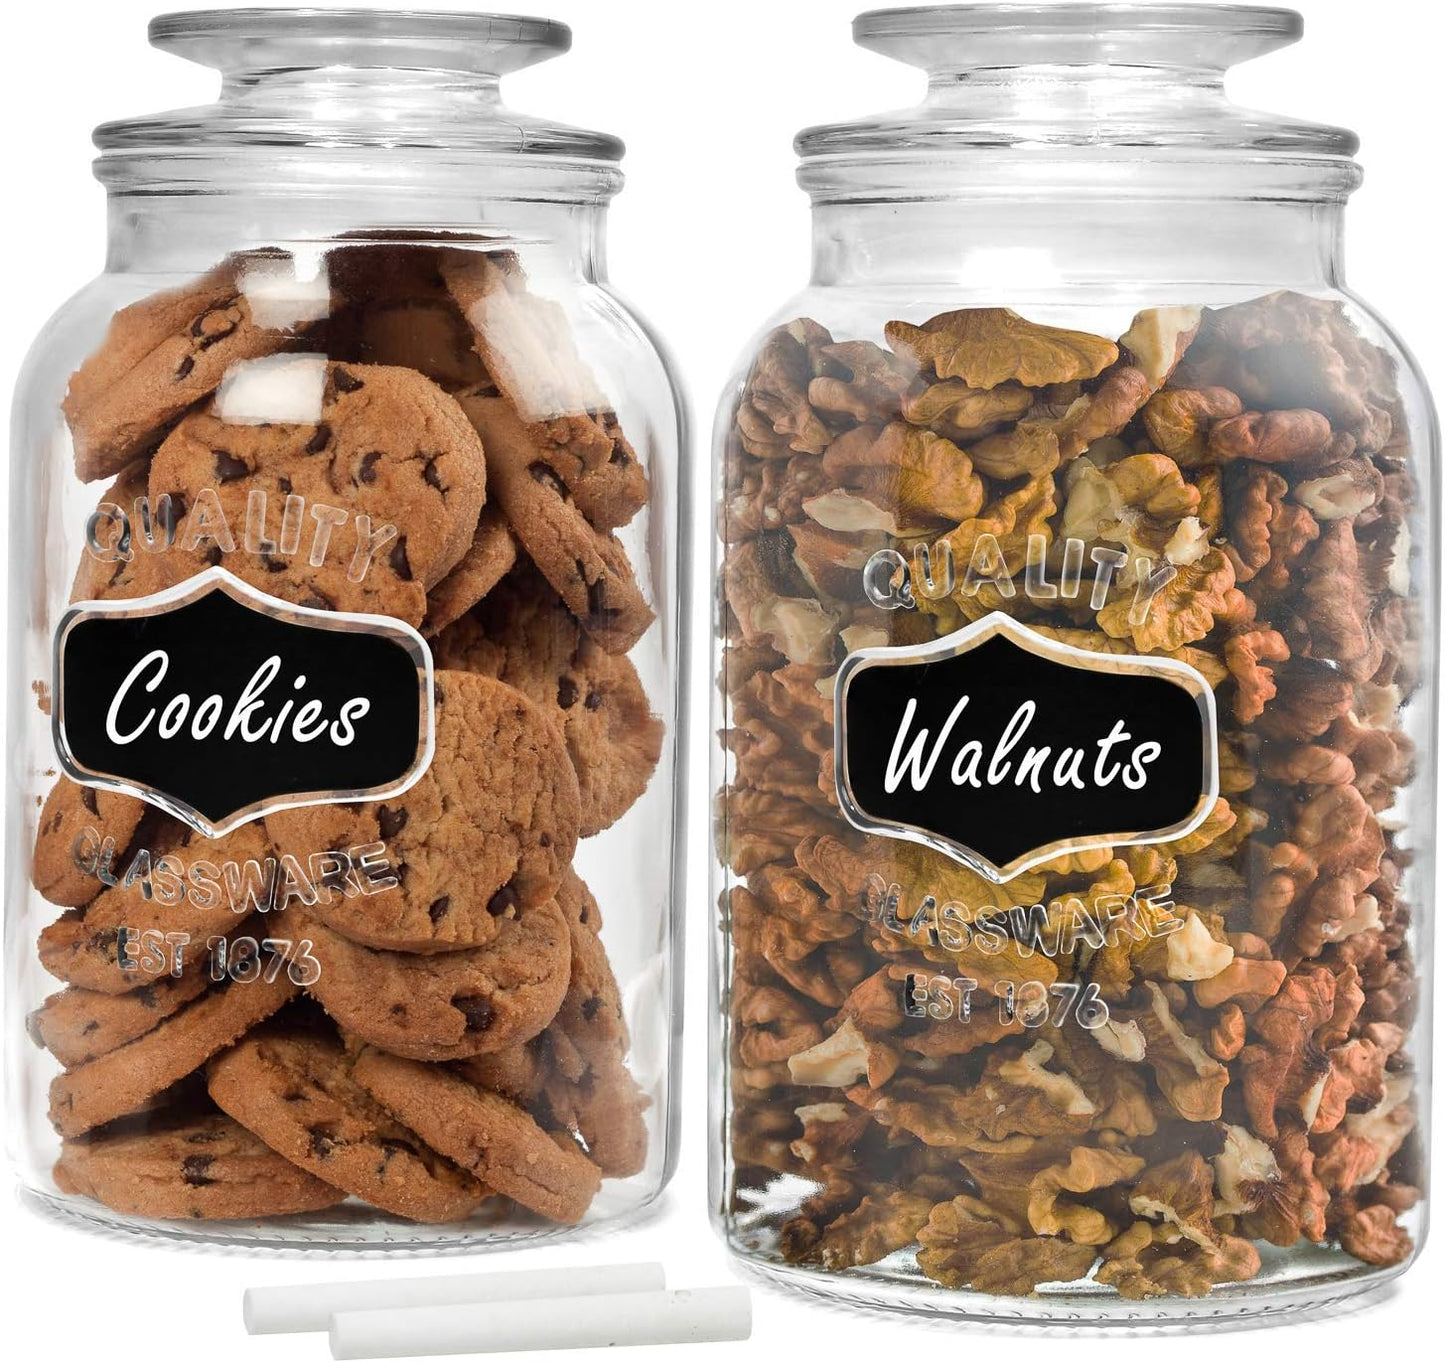 Estilo Round Glass Canister Jars with Airtight Lids Ideal for Cookies, Candies, Cereal - Cookie Jar - Includes Chalkboard Labels and Chalk - 1/2 Gallon (Set of 2), Clear